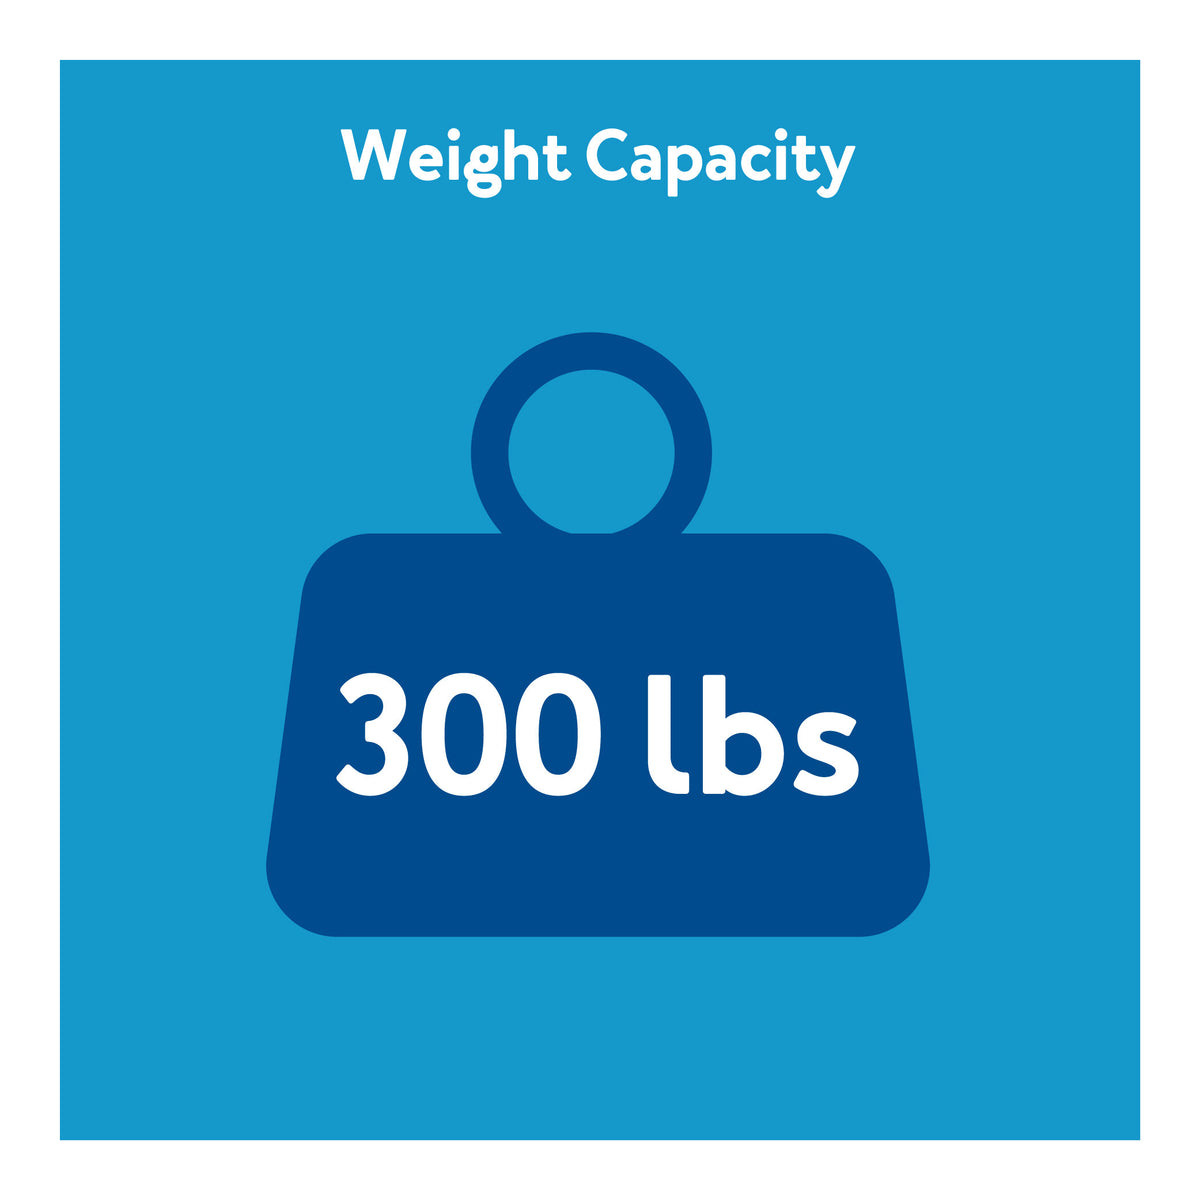 A weight capacity icon with text, 